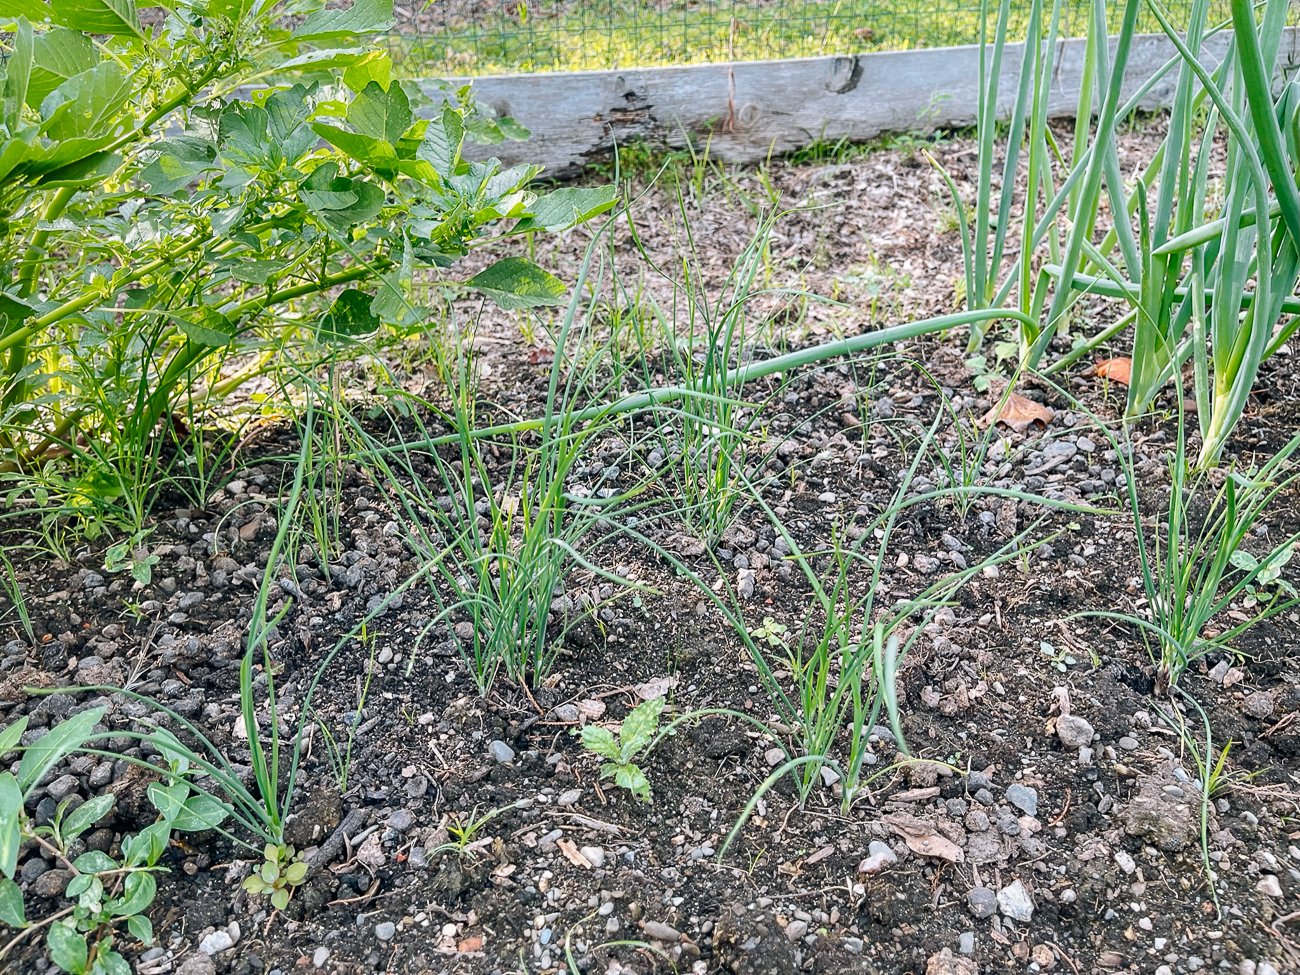 clumps of young garlic chive plants